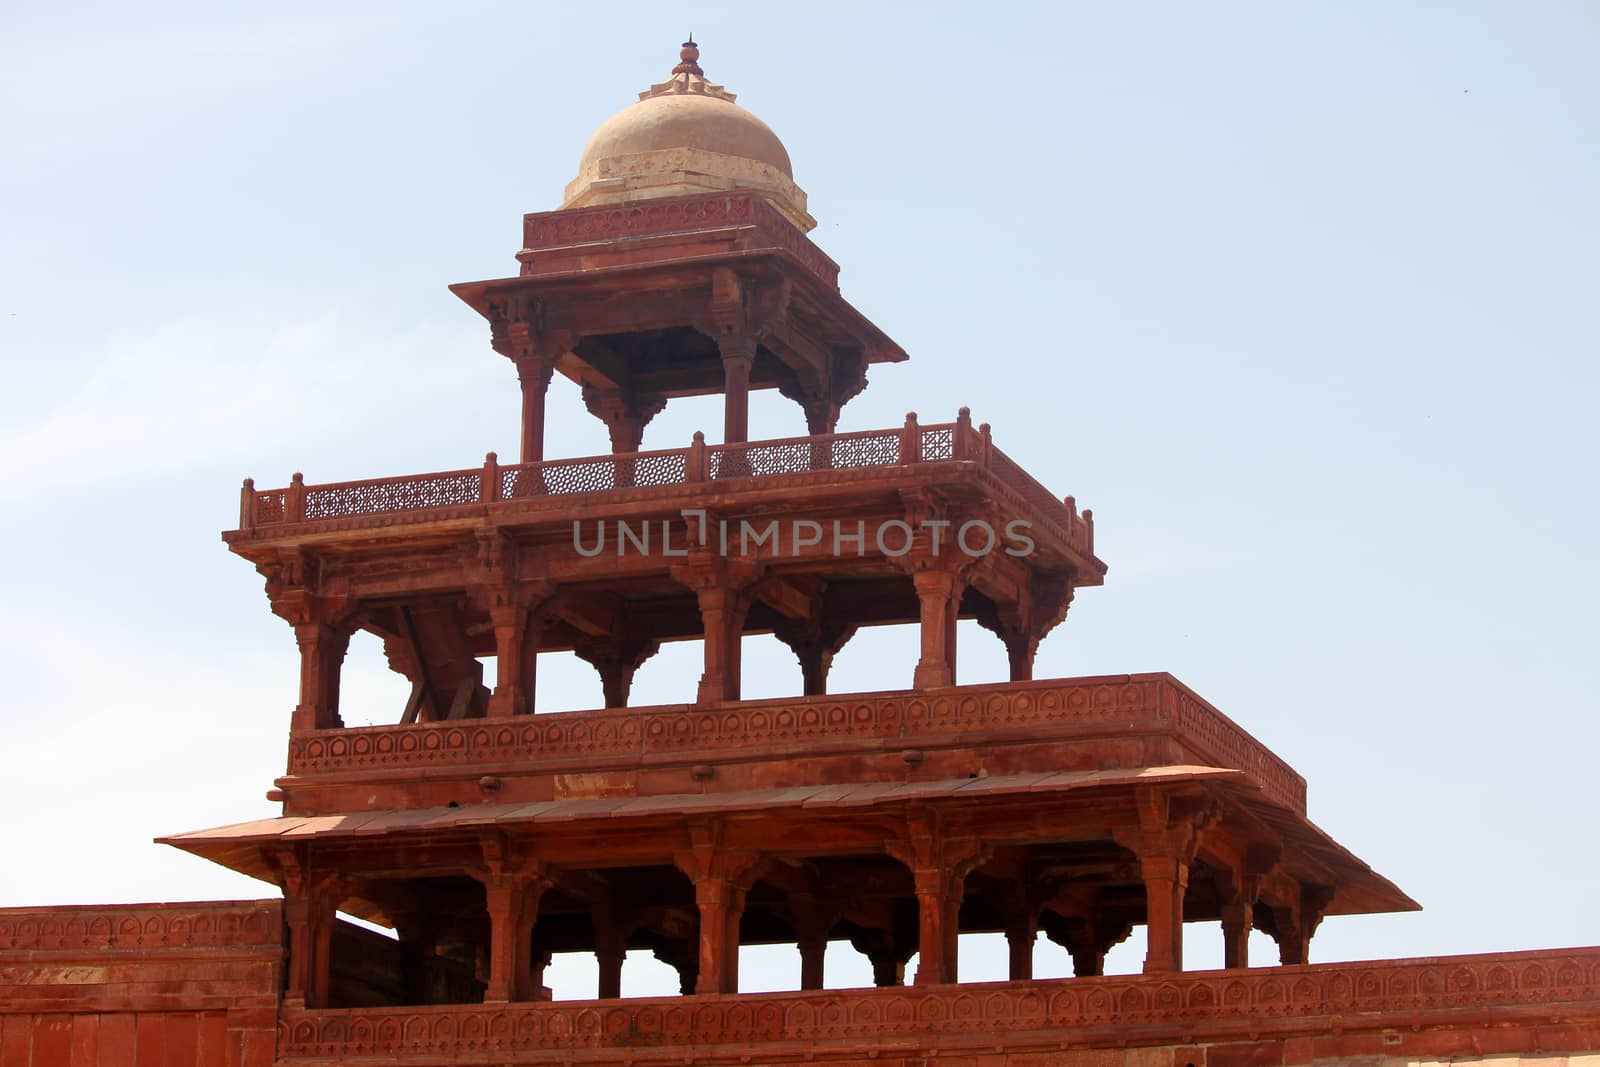 The beautiful architecture of the Fatehpur Sikri fort in India.